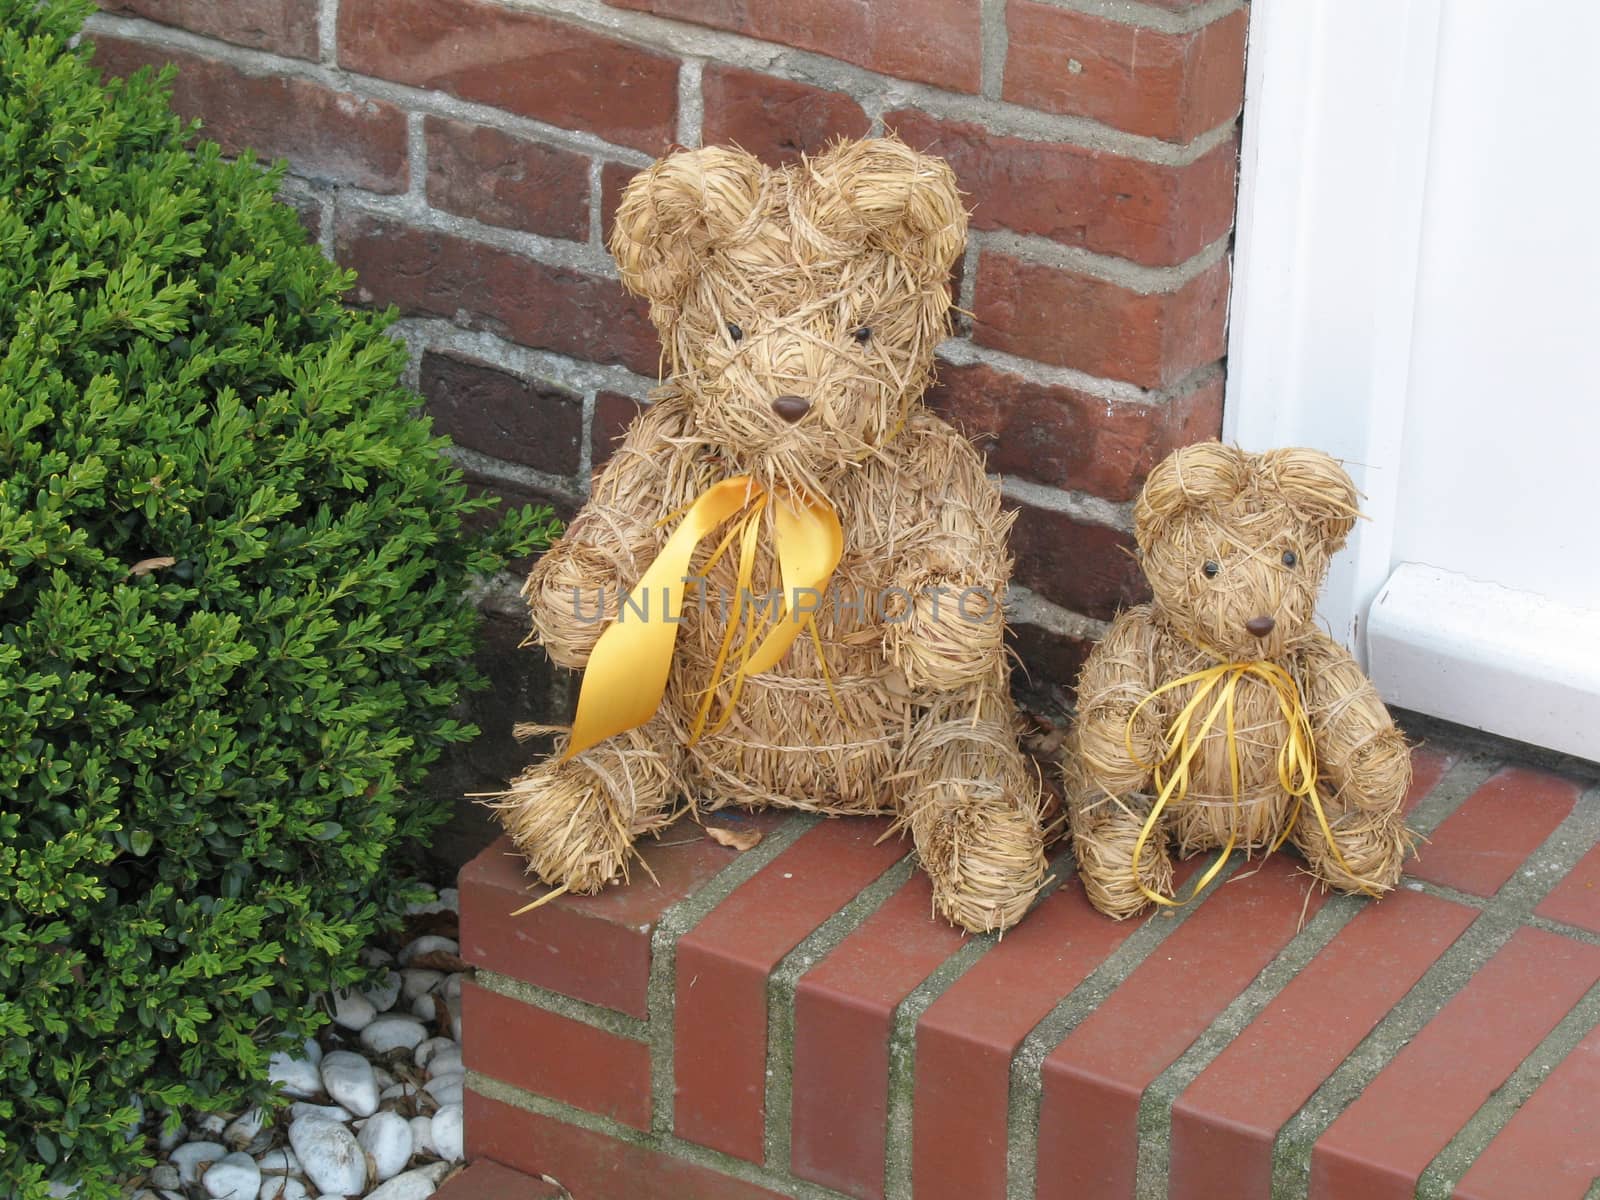 Two teddy bears are sitting on a doorstep.